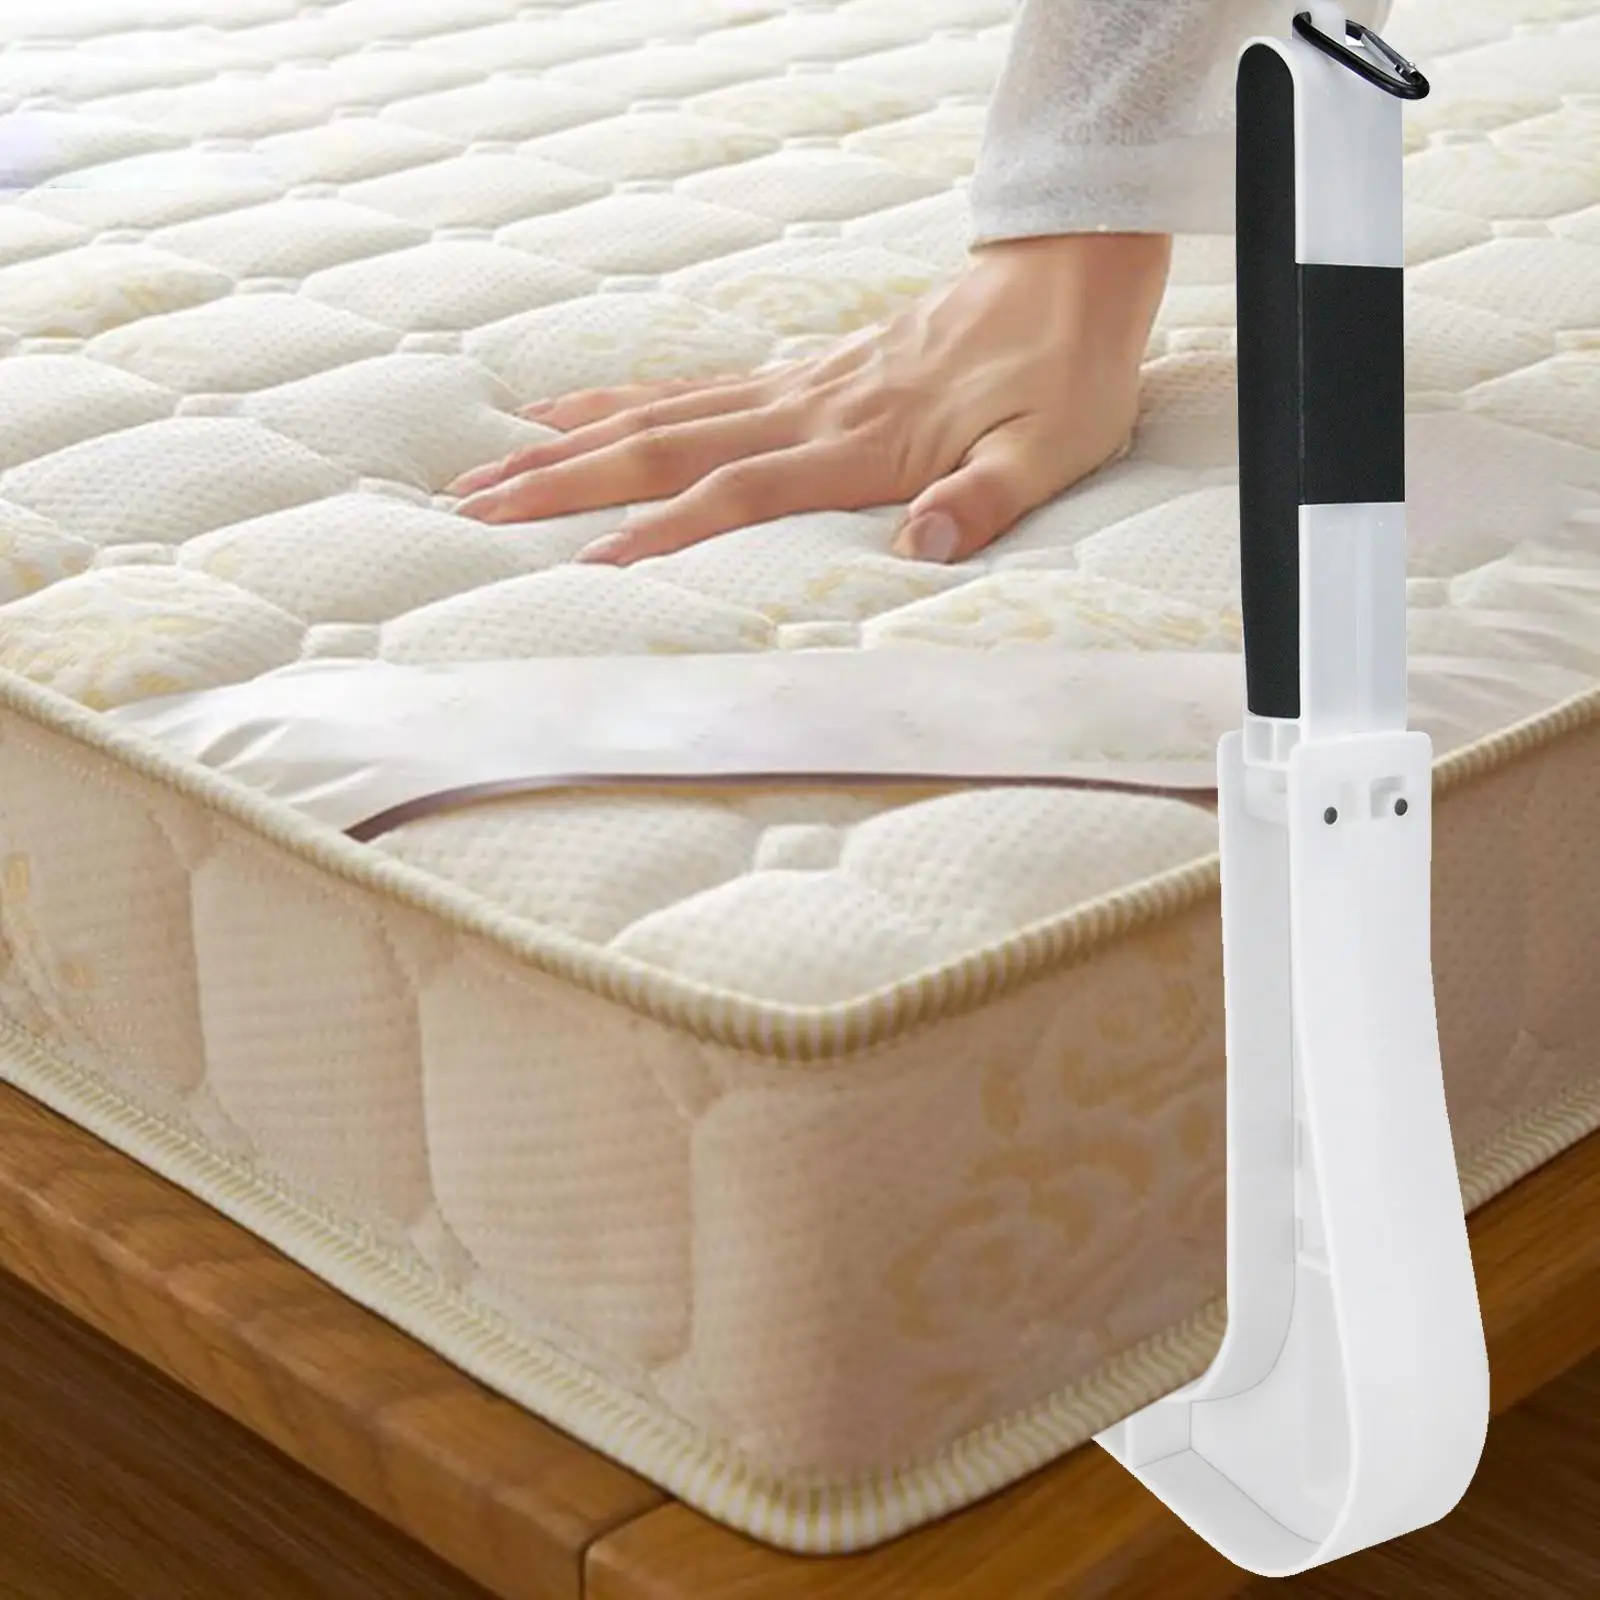 Mattress Lifting Tool Helps Lift and Hold The Mattress Bed Making Handy Tool Portable for Dorm Bedroom Home Changing Sheets